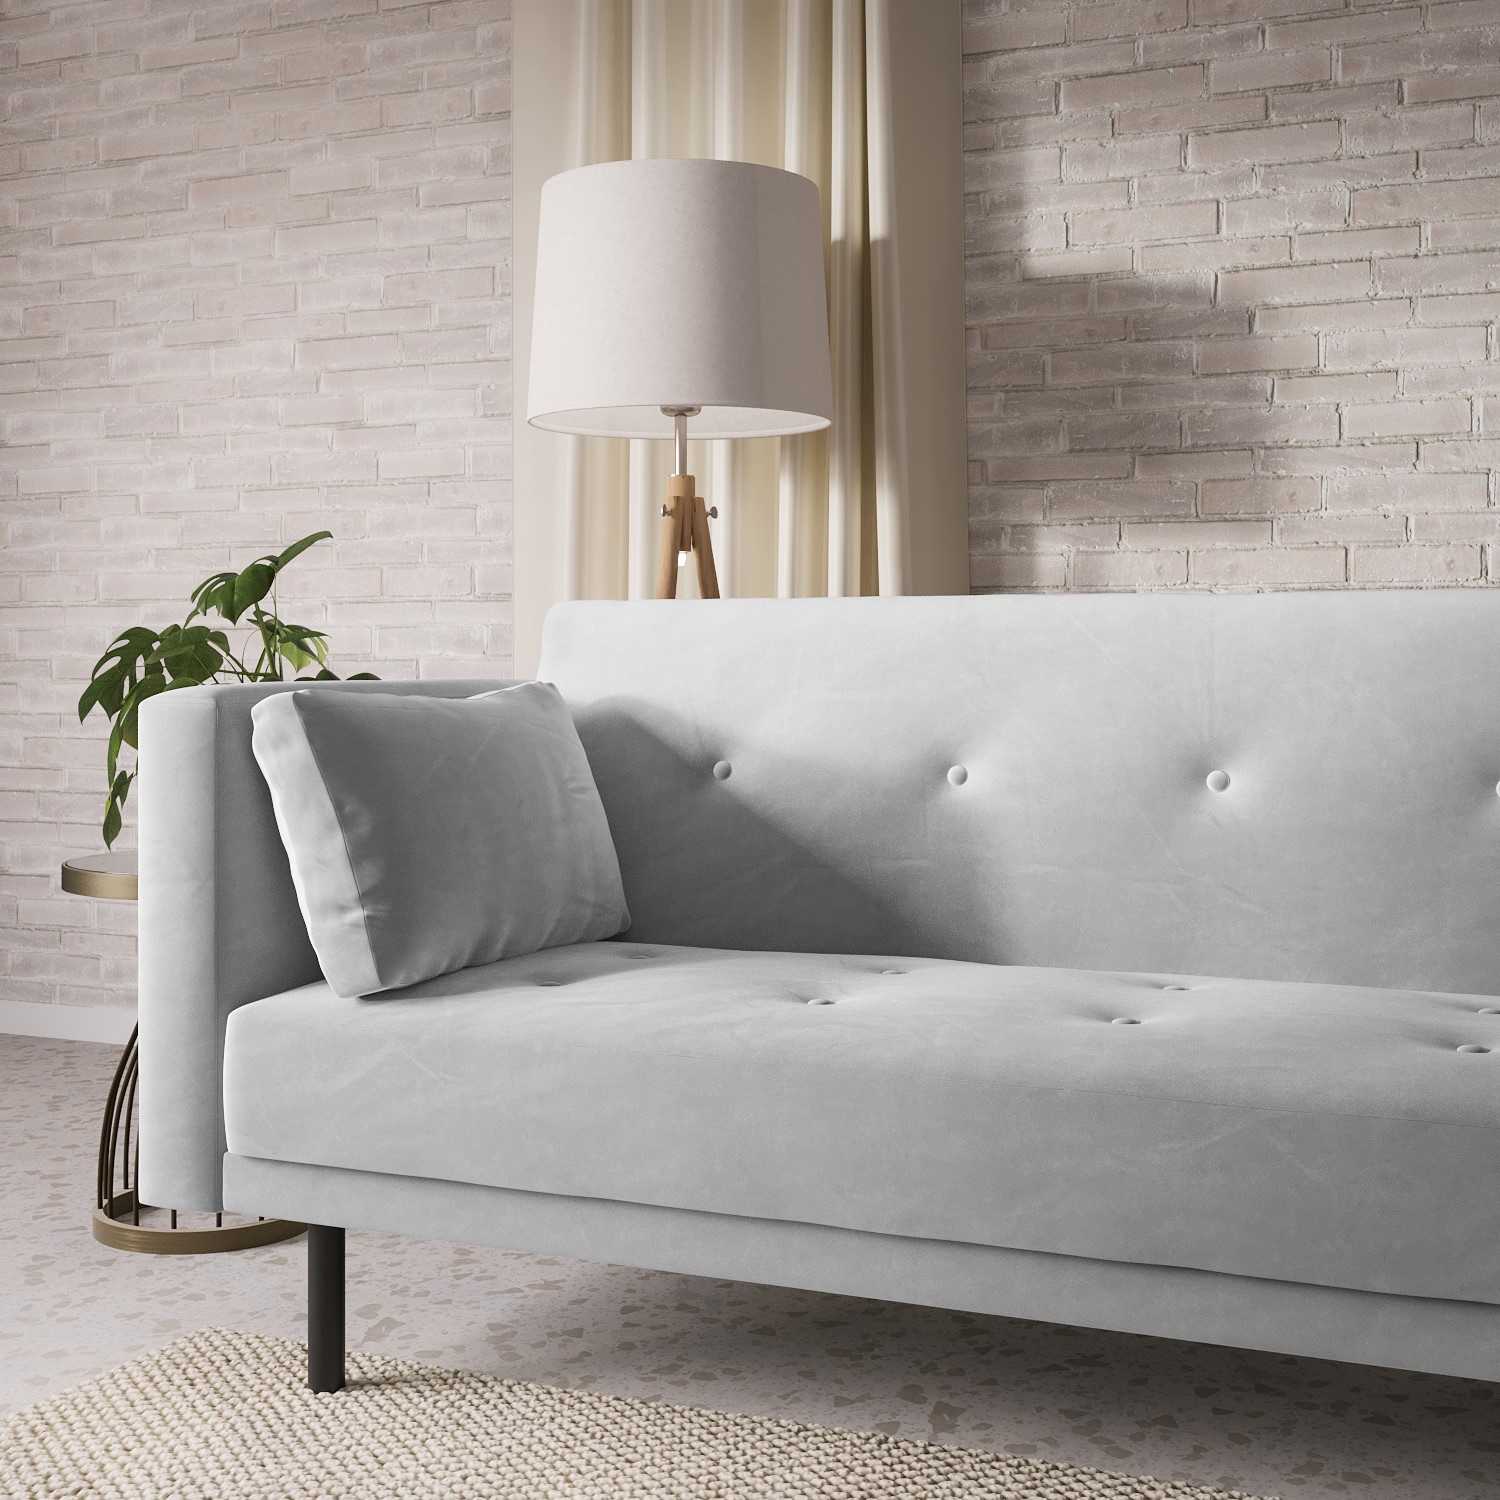 Read more about Grey velvet click clack sofa bed seats 3 rory